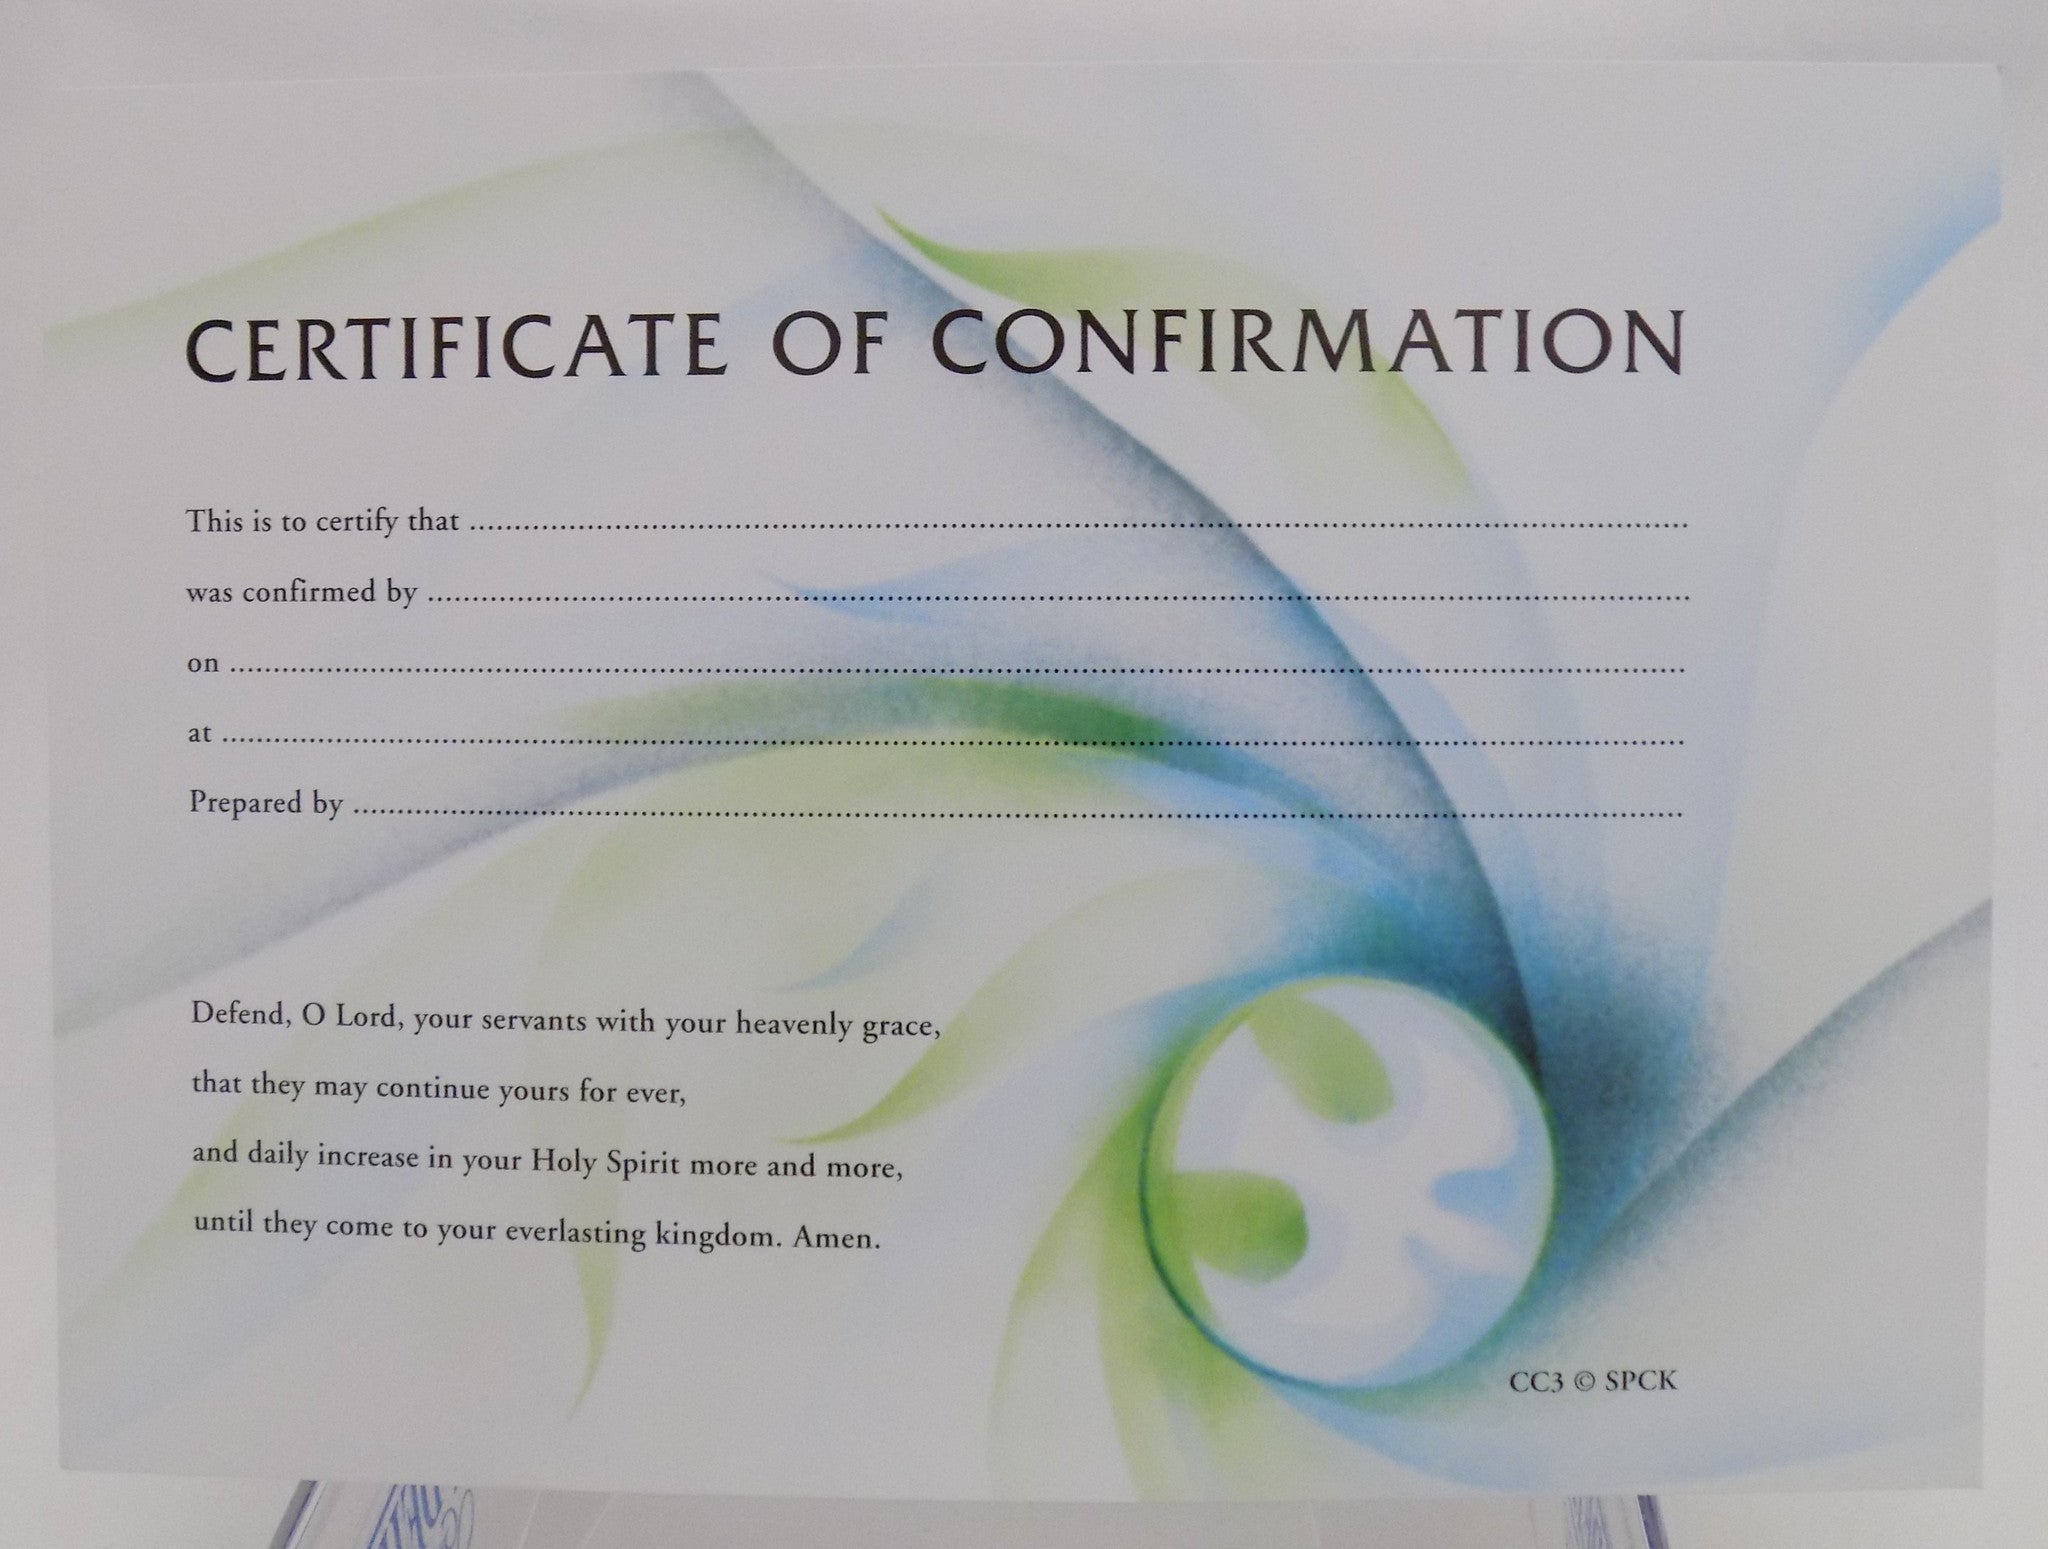 Confirmation Certificate (CC3) Liverpool Cathedral